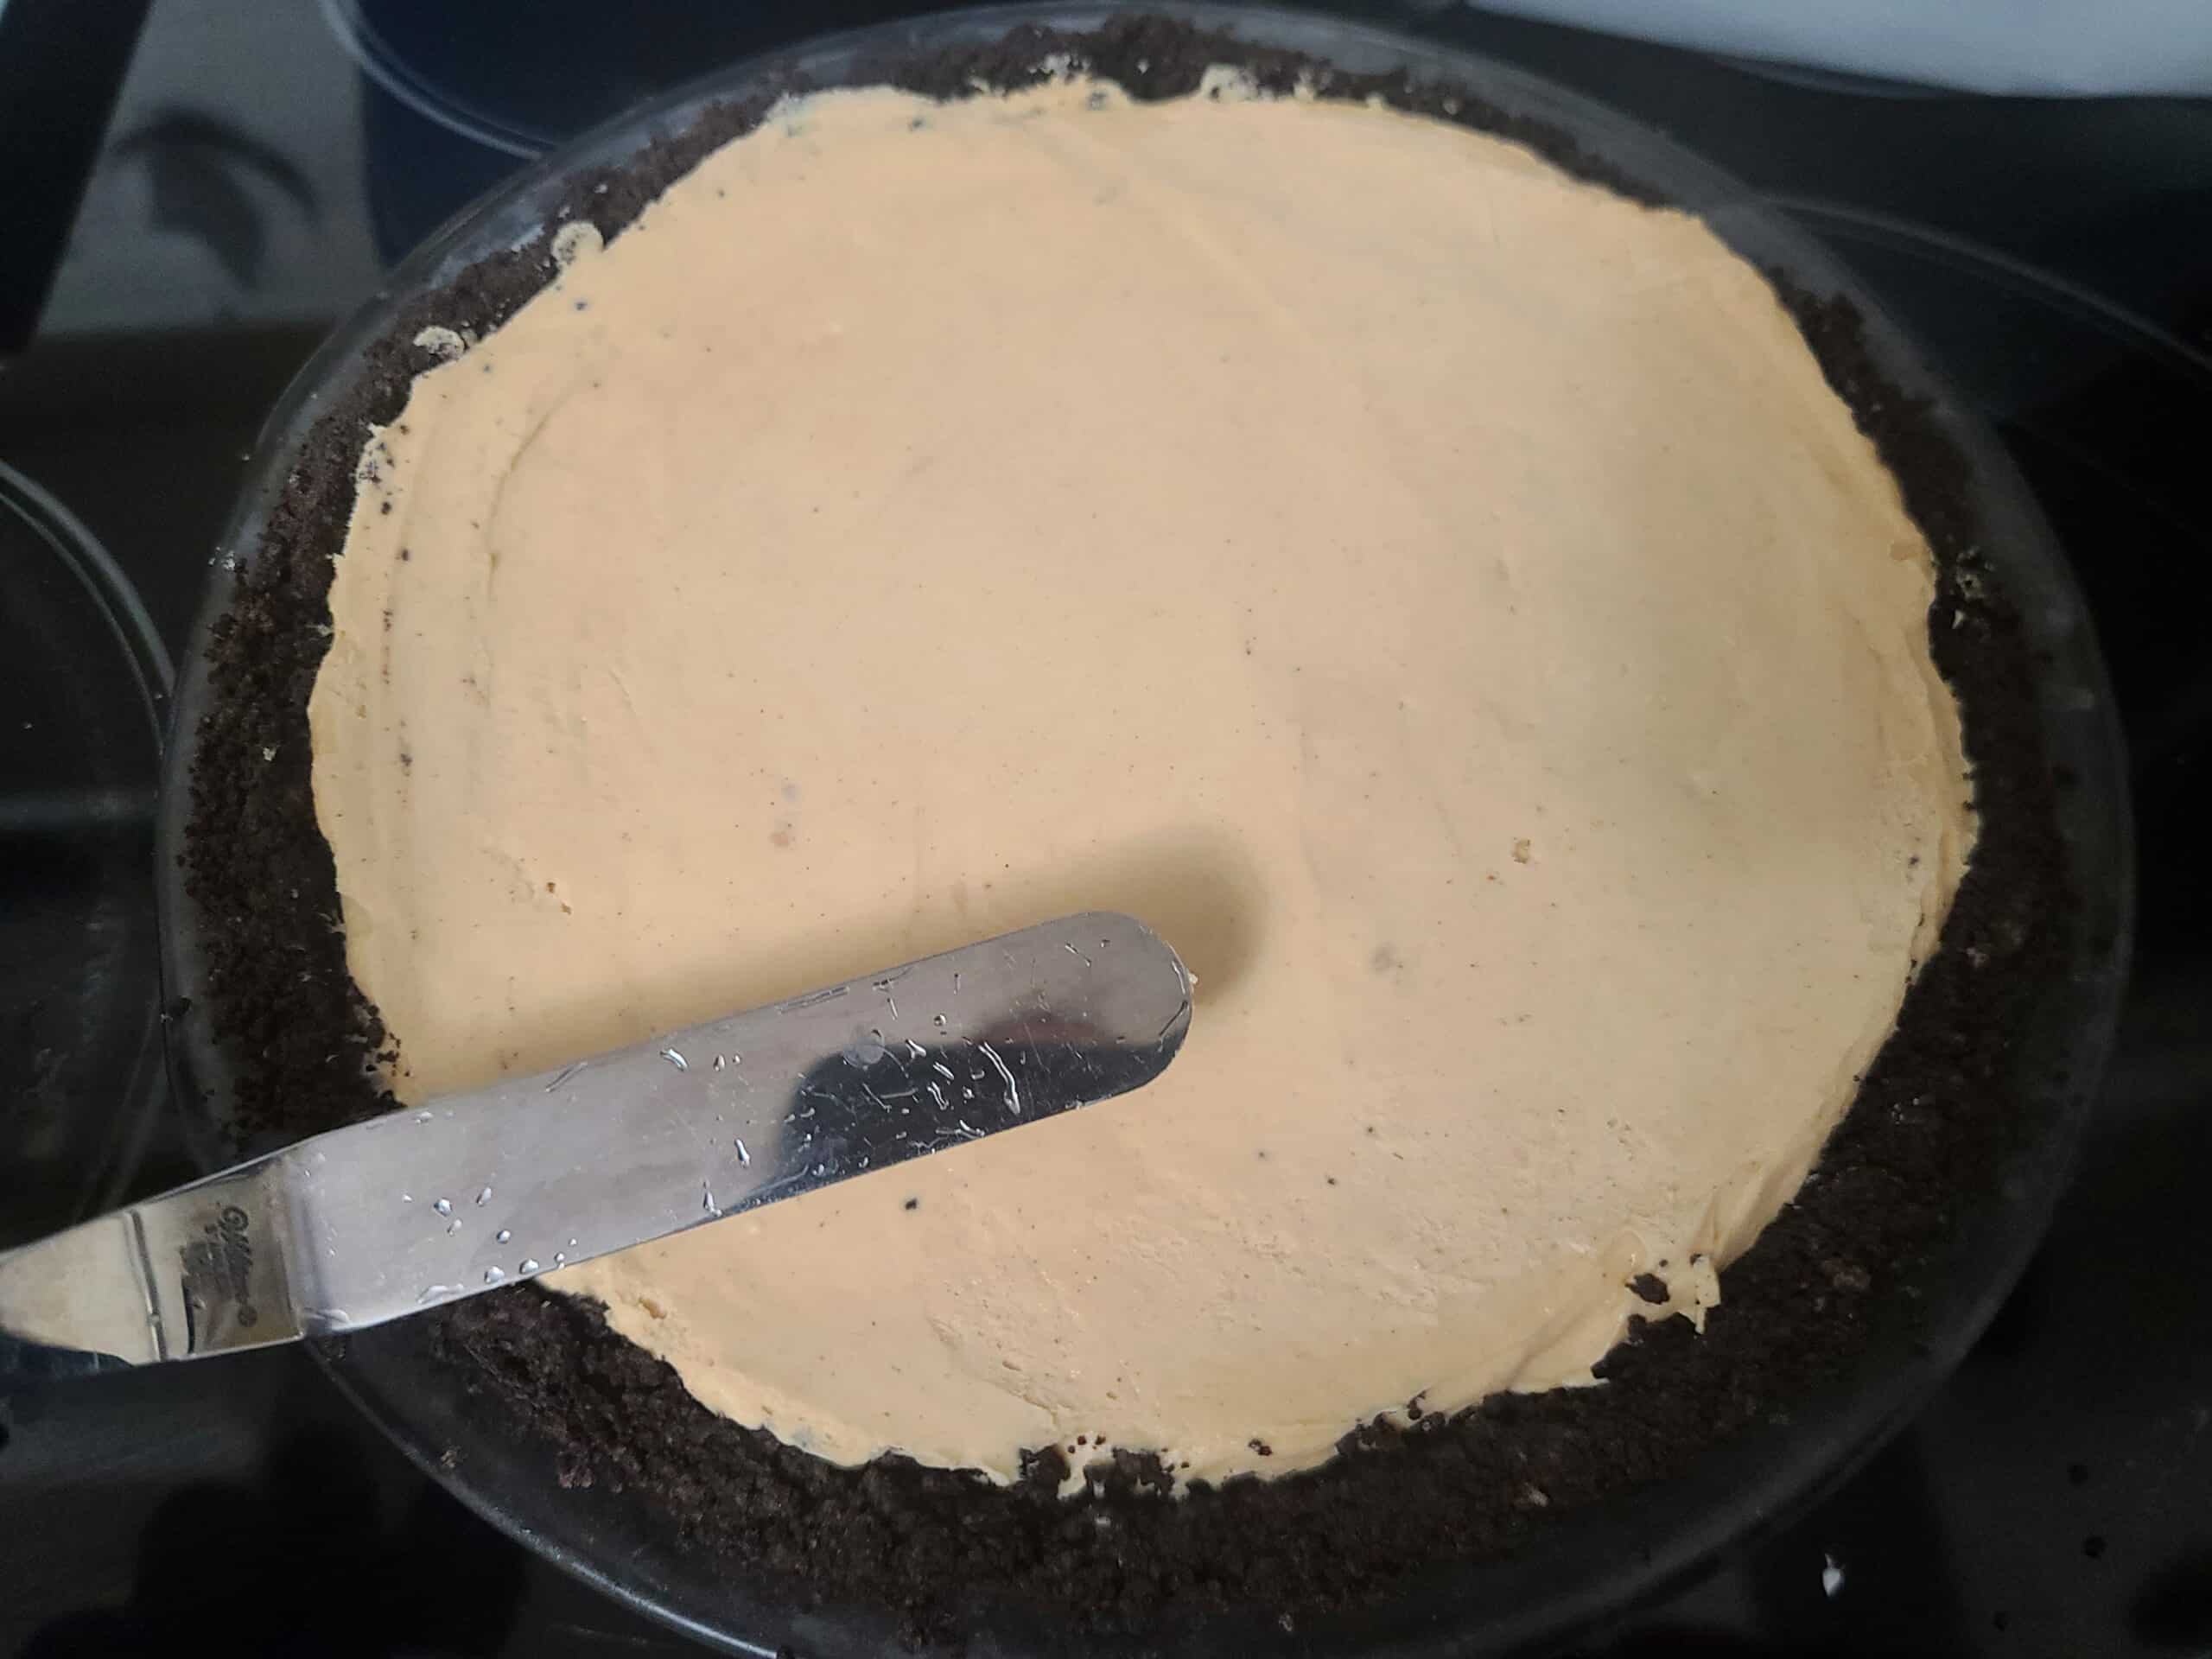 A hot spatula being used to smooth the surface of the peanut butter pie.